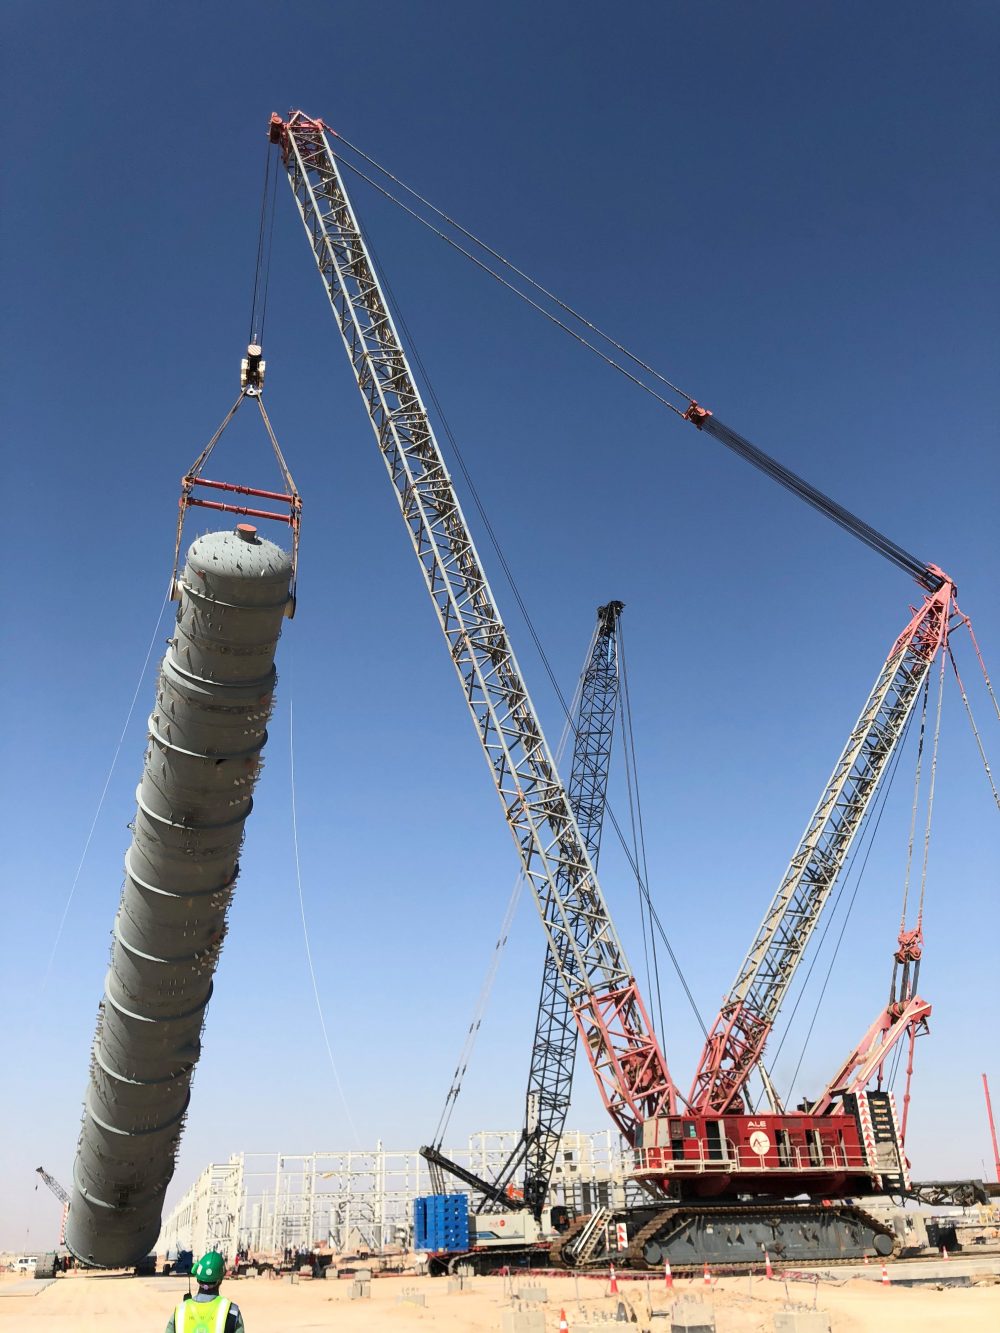 ALE using their CC8800-1 as the main crawler crane to lift one of the refinery components and a CC2800 as tailing crane.